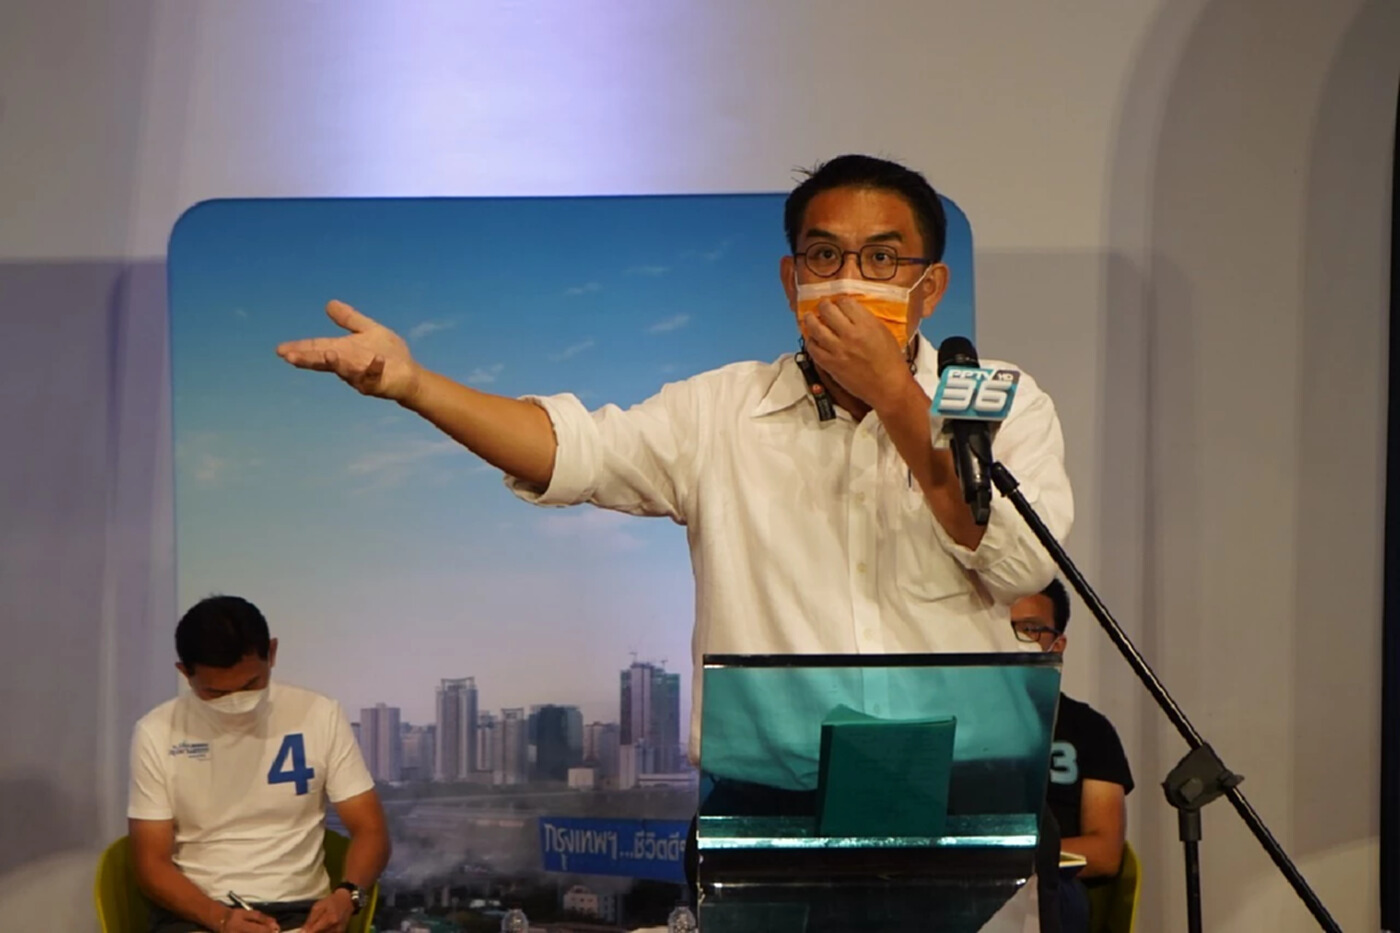 Bangkok governor candidate Wiroj introduces his policy to fully reopen Bangkok and all sectors, including entertainment, and remove mask mandates within 90 days